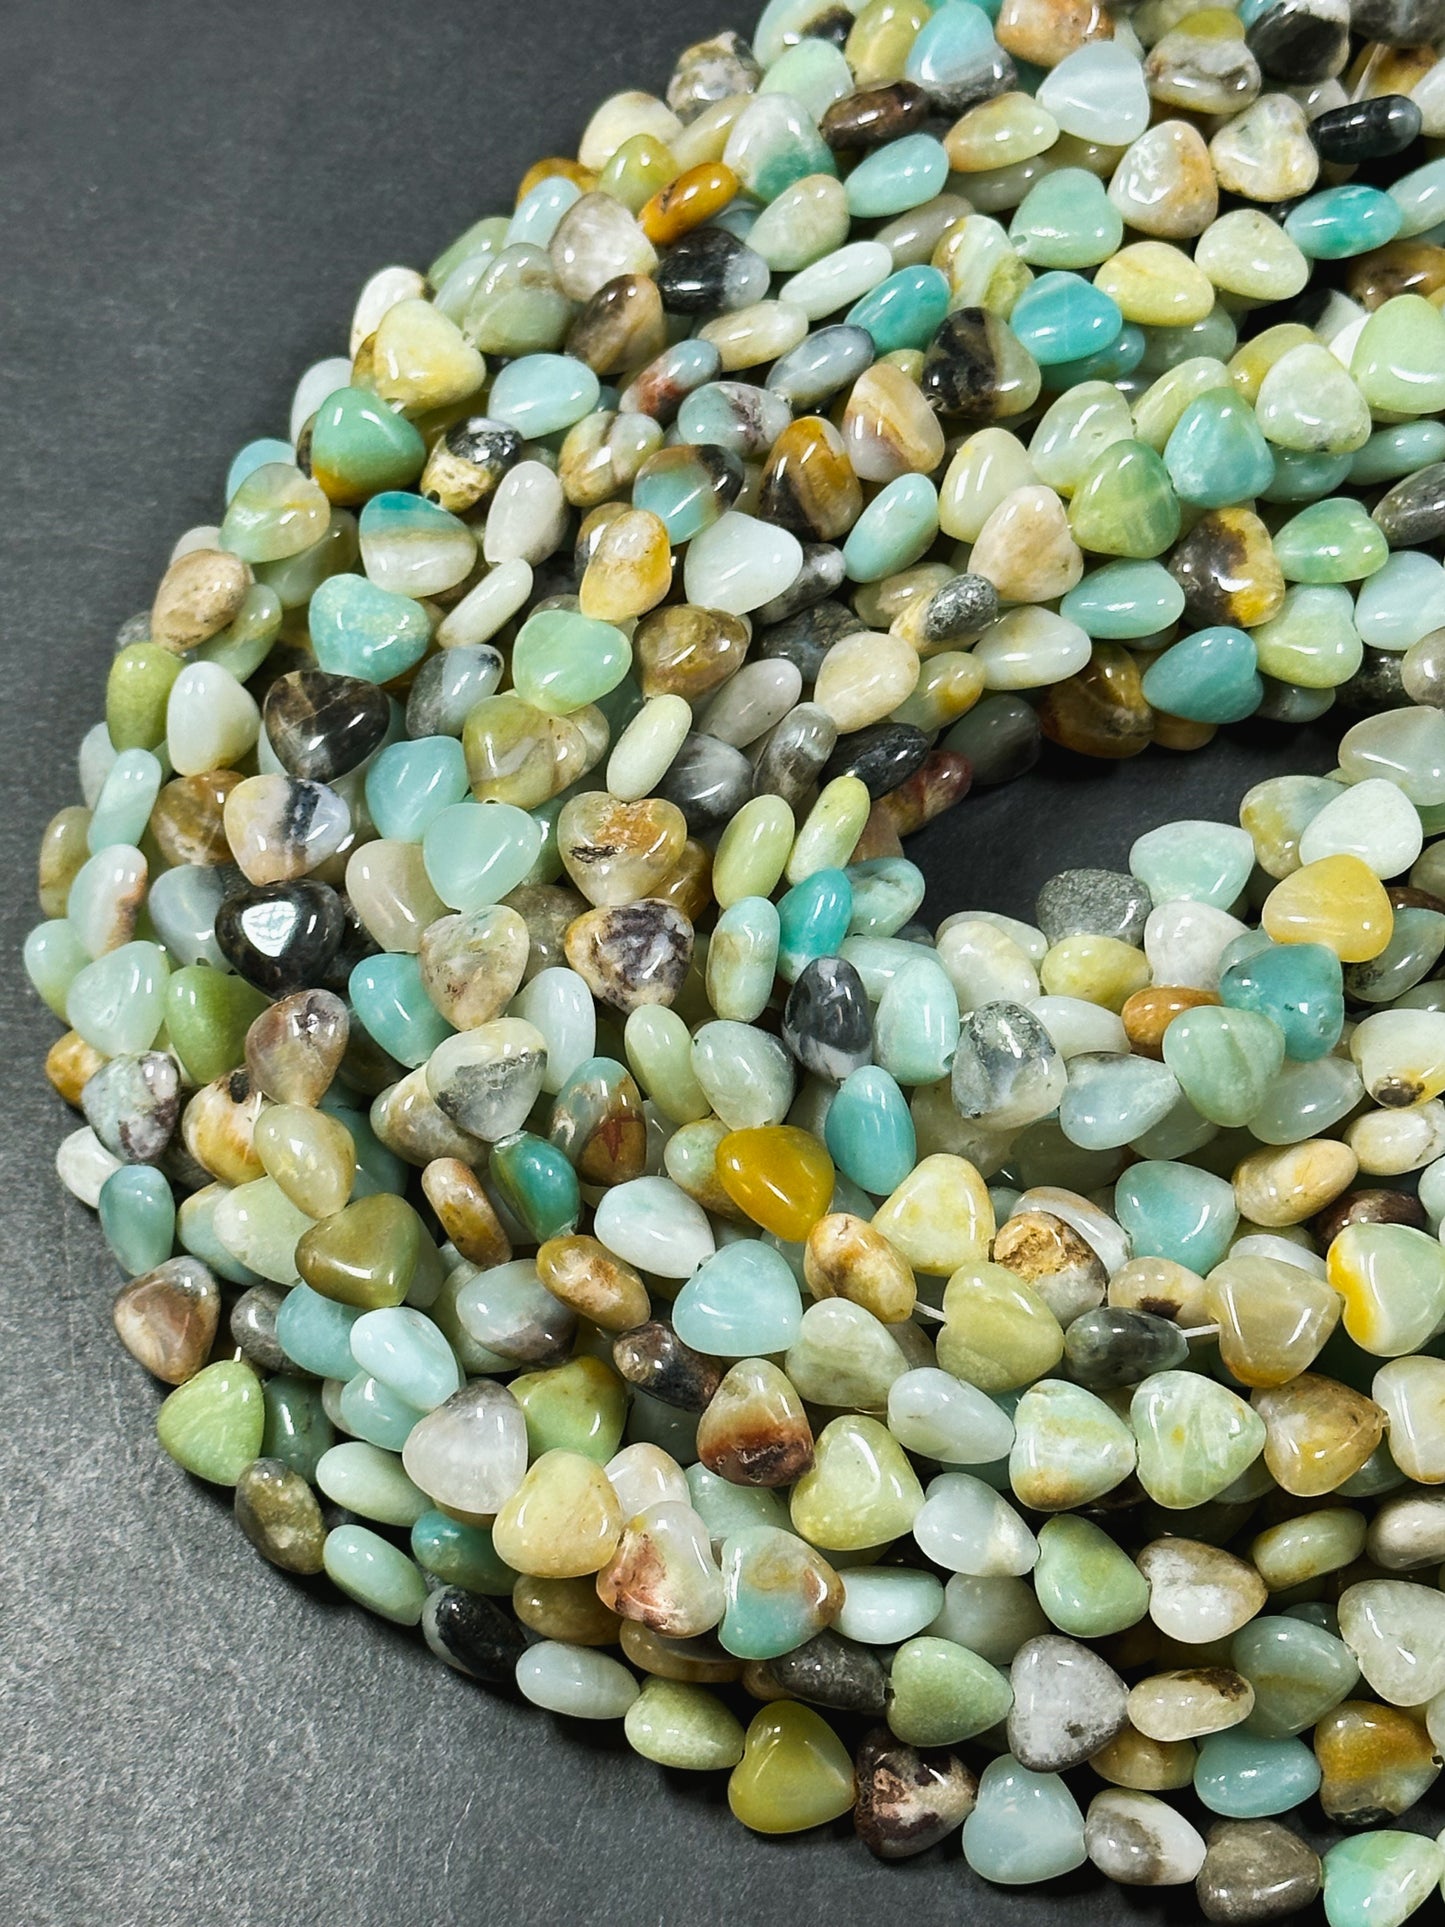 Natural Flower Amazonite Gemstone Bead 10mm Heart Shape, Beautiful Natural Blue Brown Color Amazonite Bead, Great Quality Full Strand 15.5"